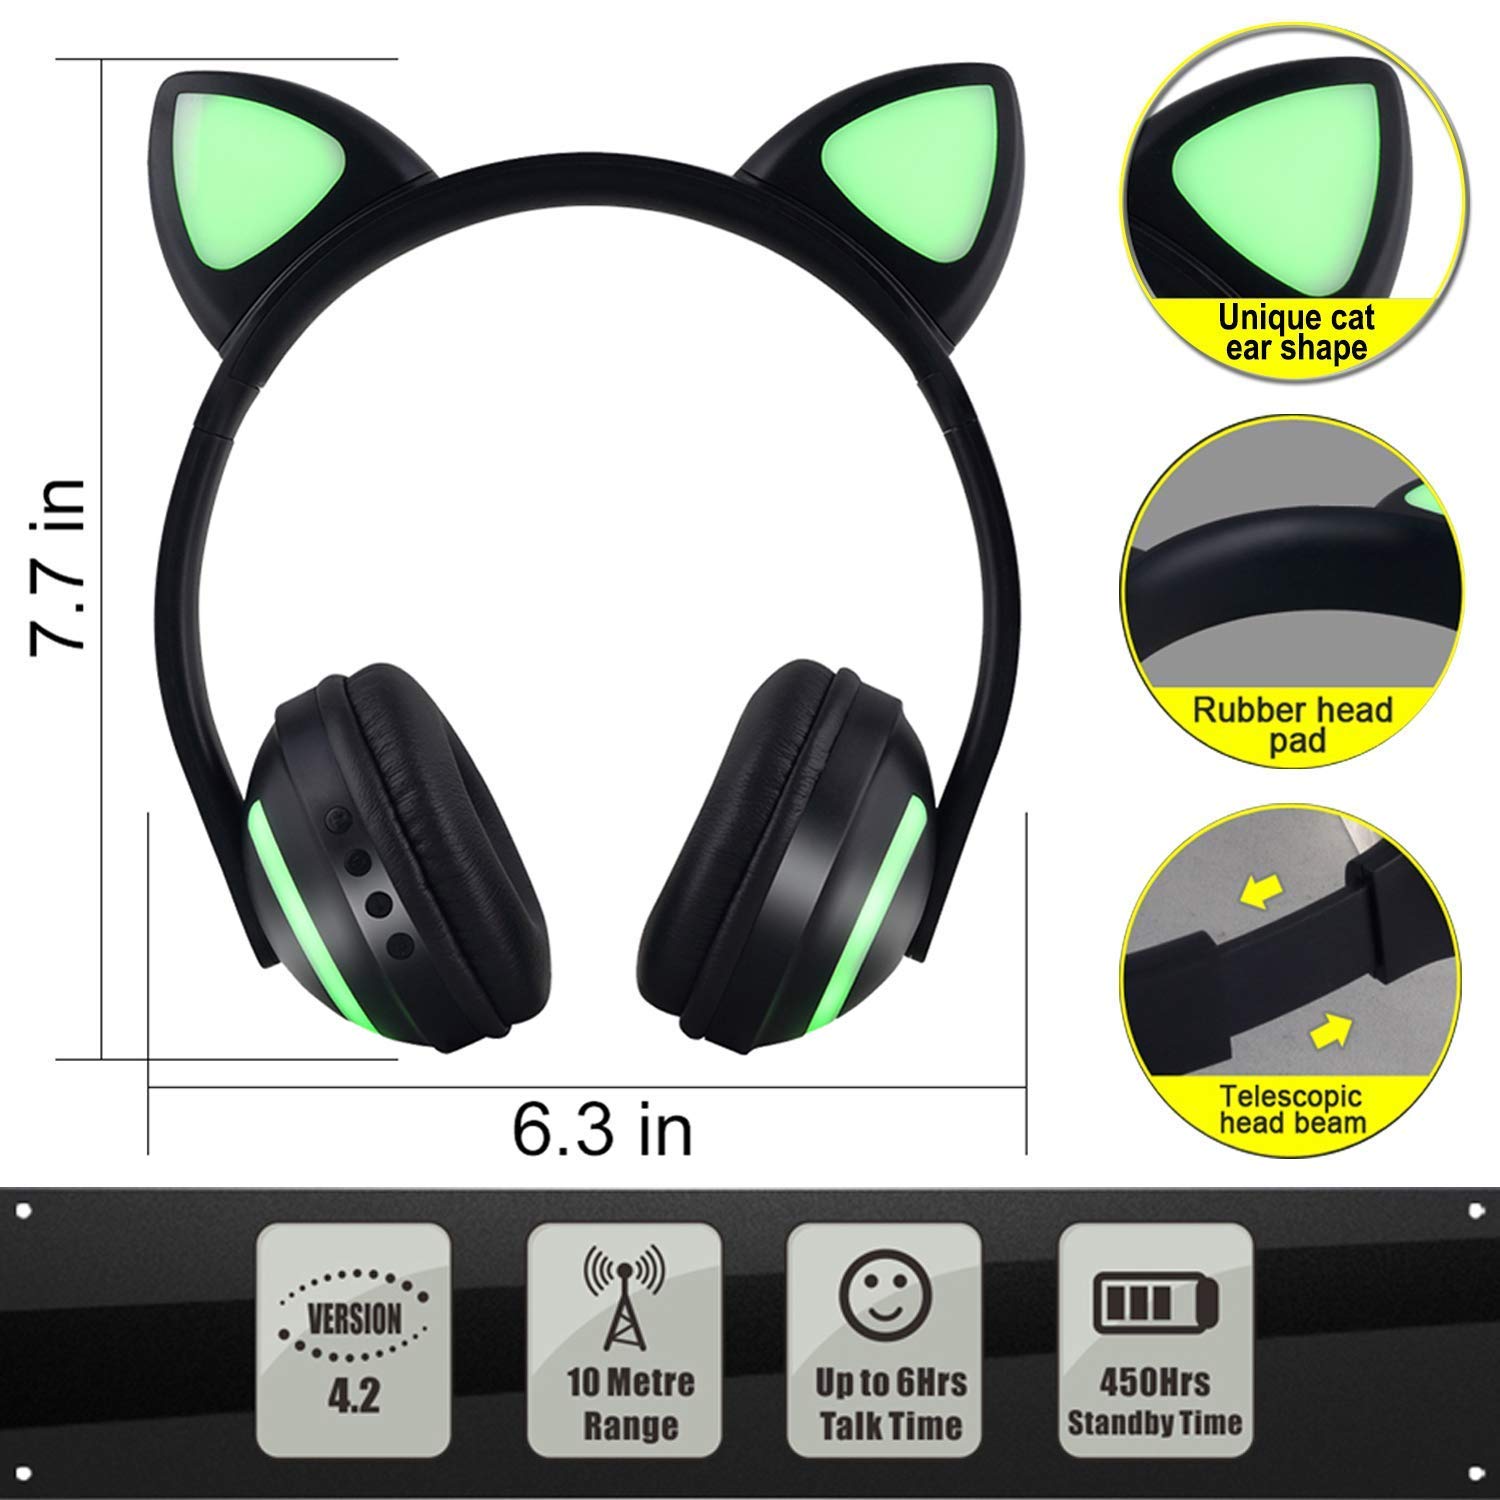 Treesine Wireless Bluetooth Cat Ear Headphones with Mic 7 Colors LED Light Flashing Glowing On-Ear Stereo Gaming Headset Compatible with Smartphones PC Tablet for Girls Kids